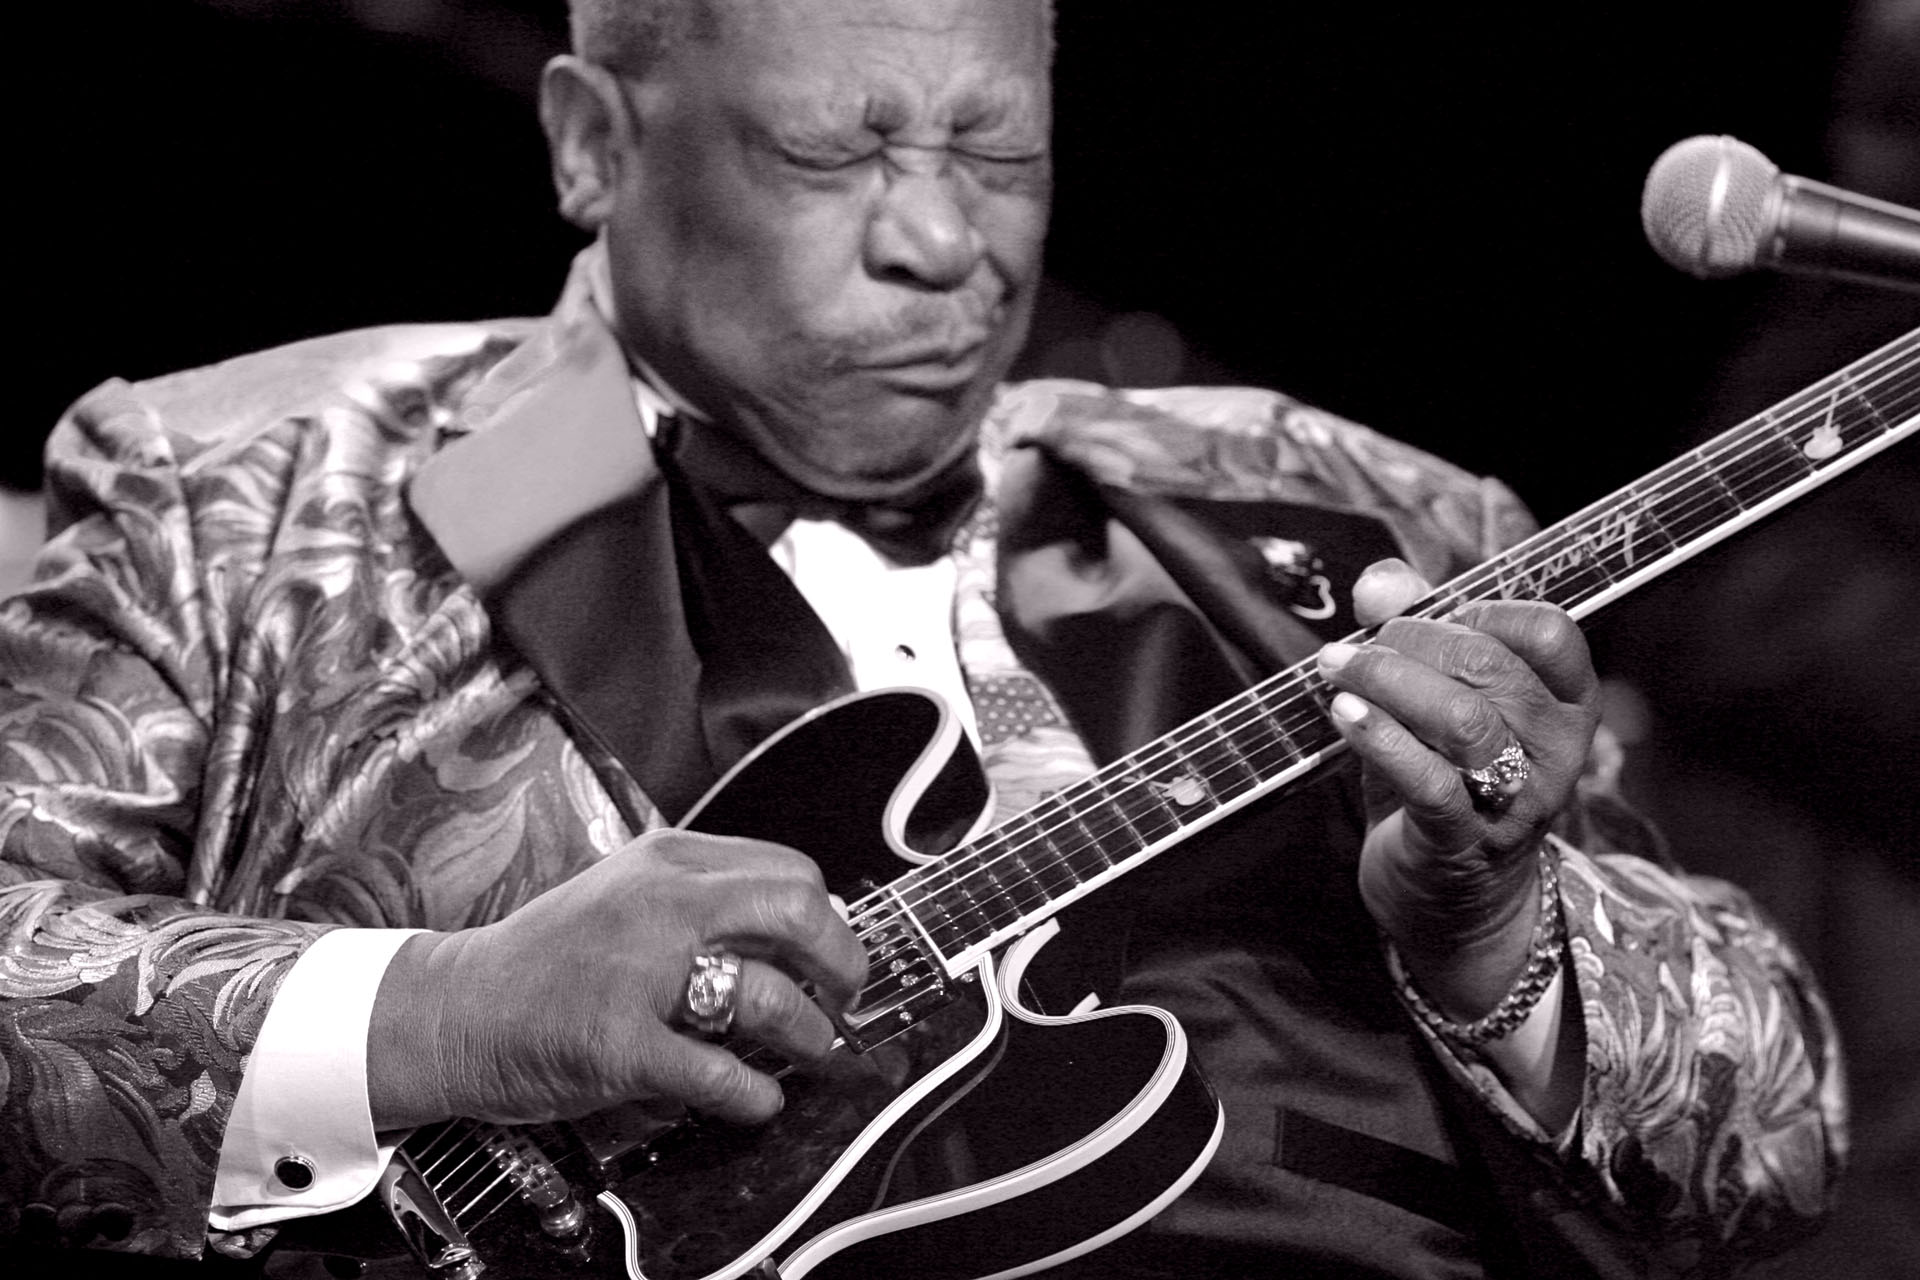 He was awarded his 15th Grammy in 2009 in the traditional blues album category for “One Kind Favor.”